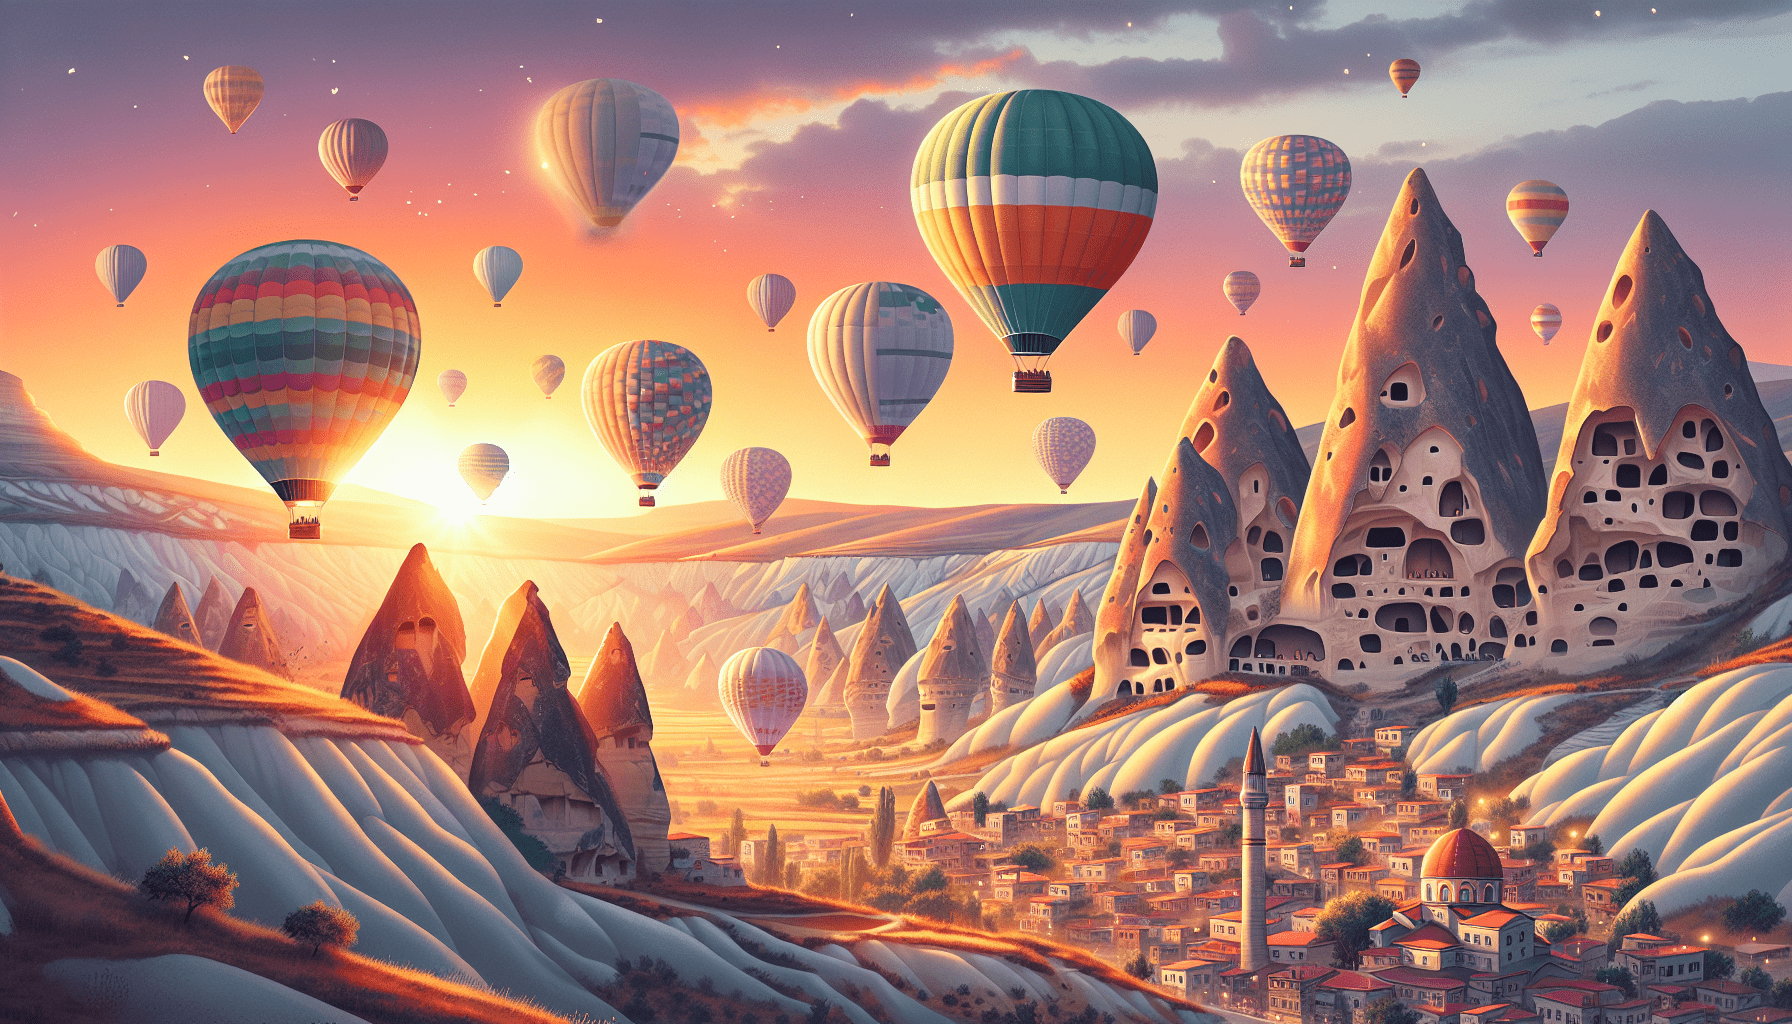 10 Things You Need to Know About Cappadocia Hot Air Balloon Rides